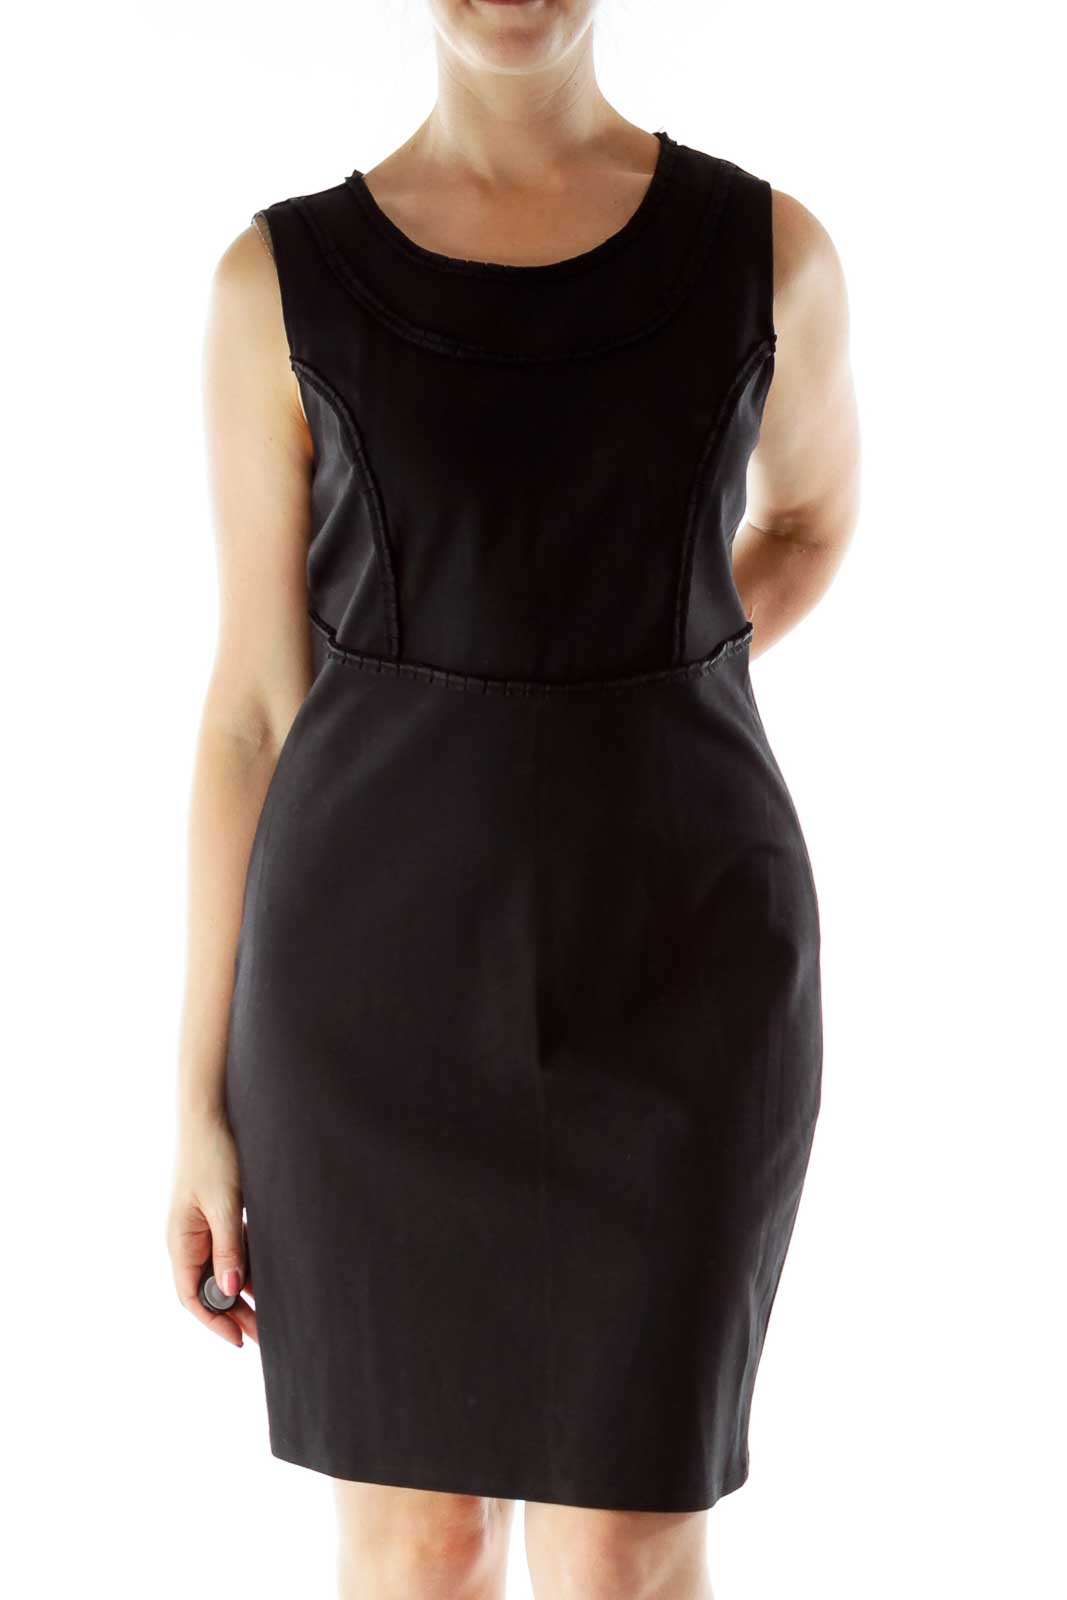 Black Fitted Work Dress Front